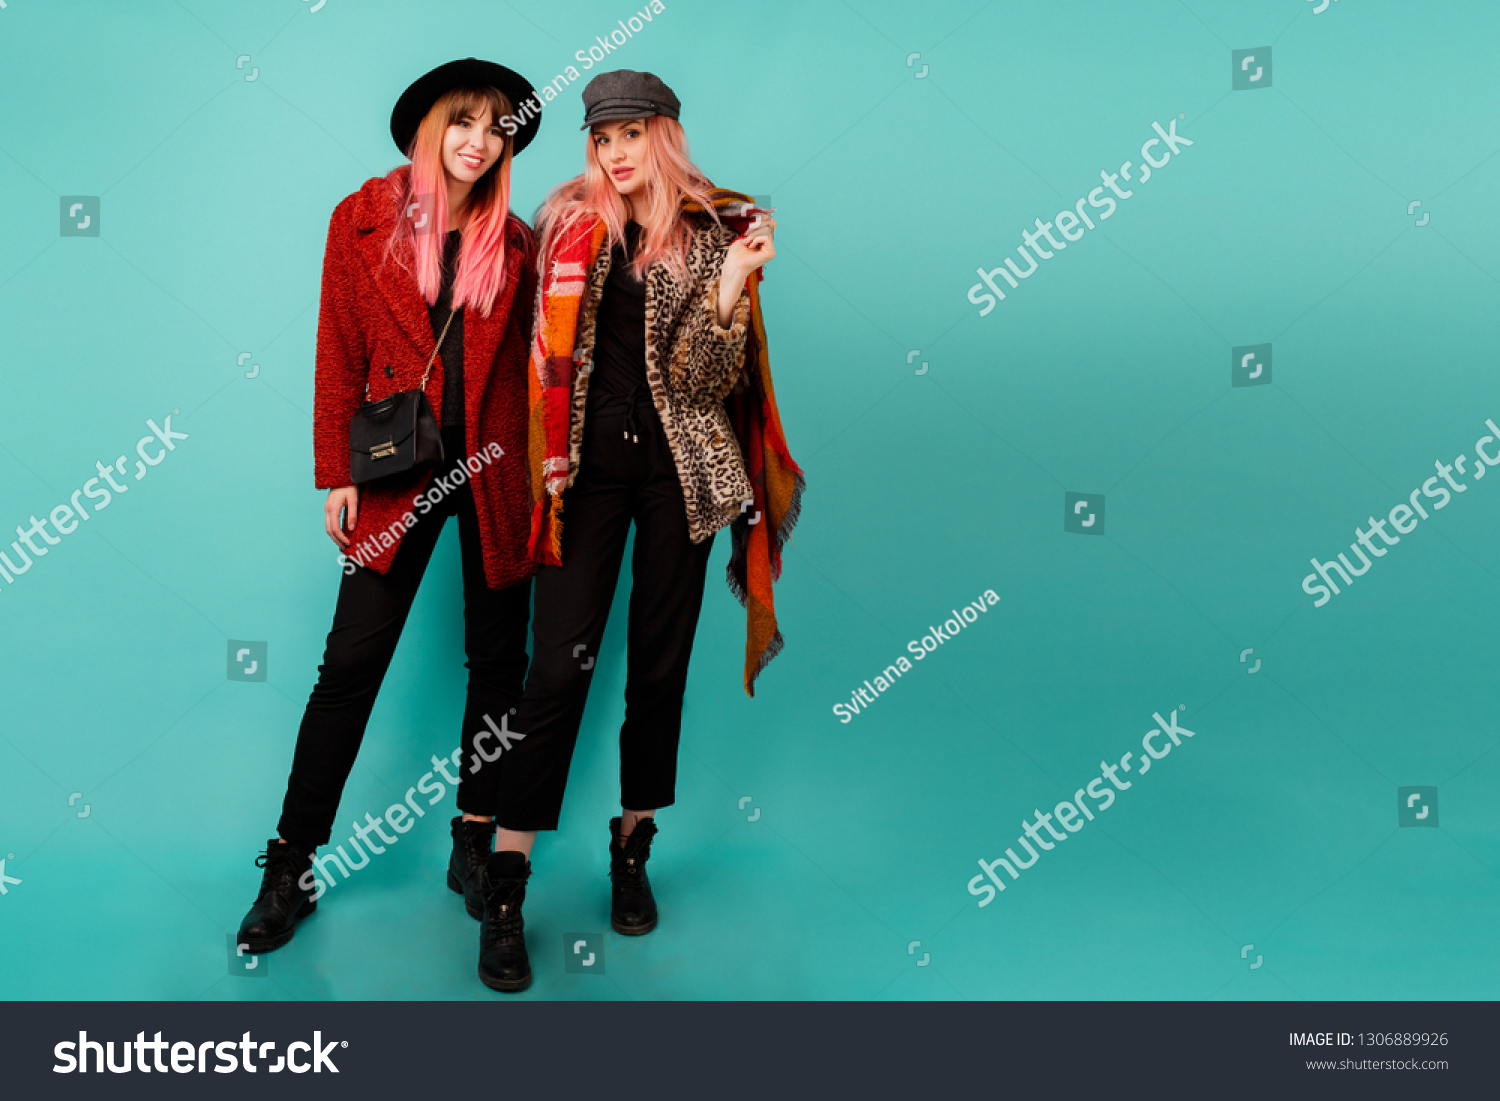 Full Height Image Two Happy Cheeky Foto Stock 1306889926 Shutterstock 